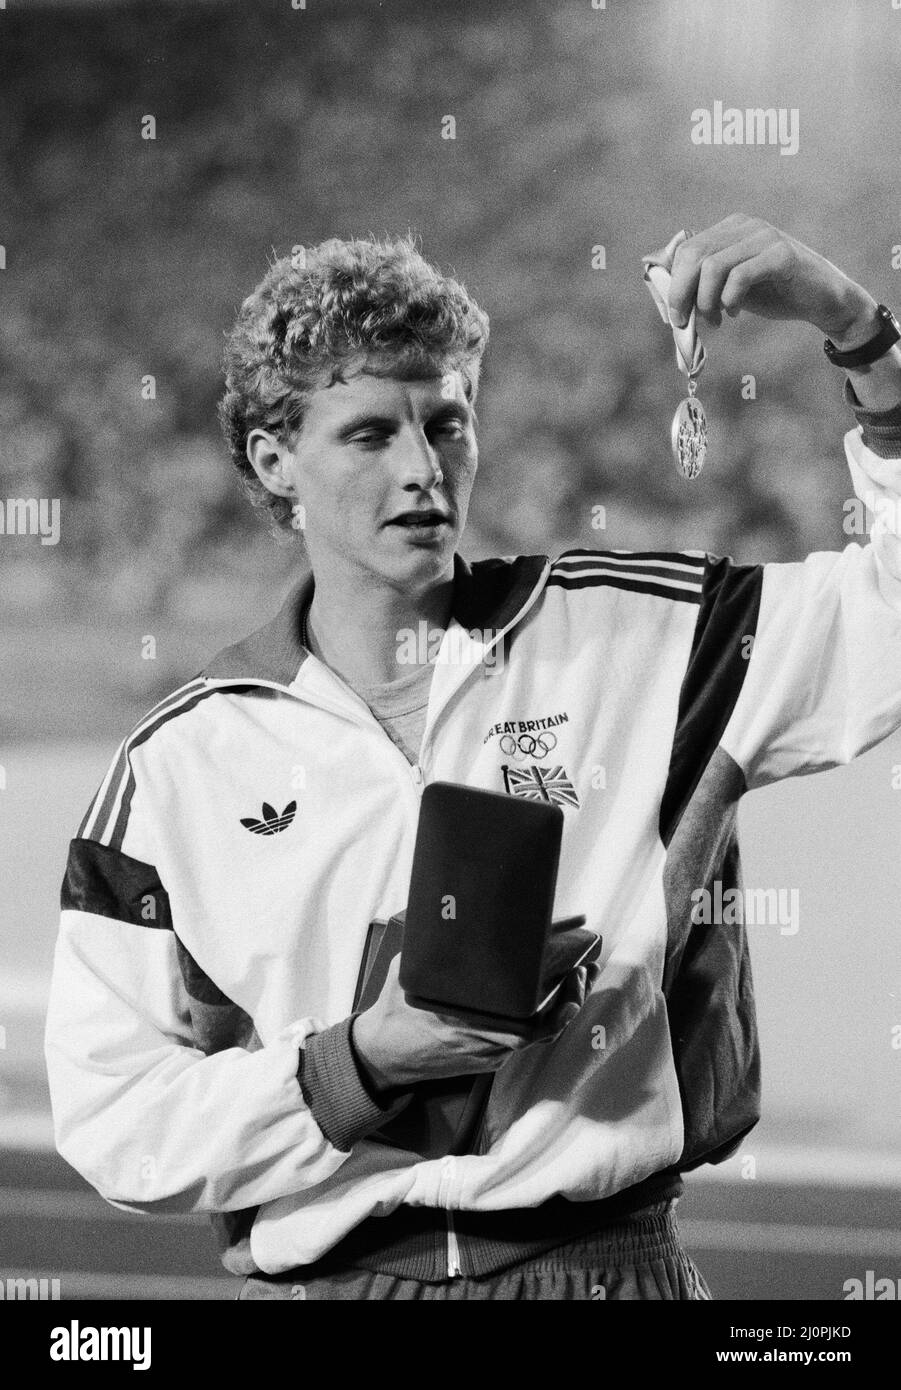 1984 Olympic Games in Los Angeles, USA. Mens Athletics.  Great Britain's Steve Cram holds his silver medal after finishing second in the Men's 1500 Metres final.  11th August 1984. Stock Photo